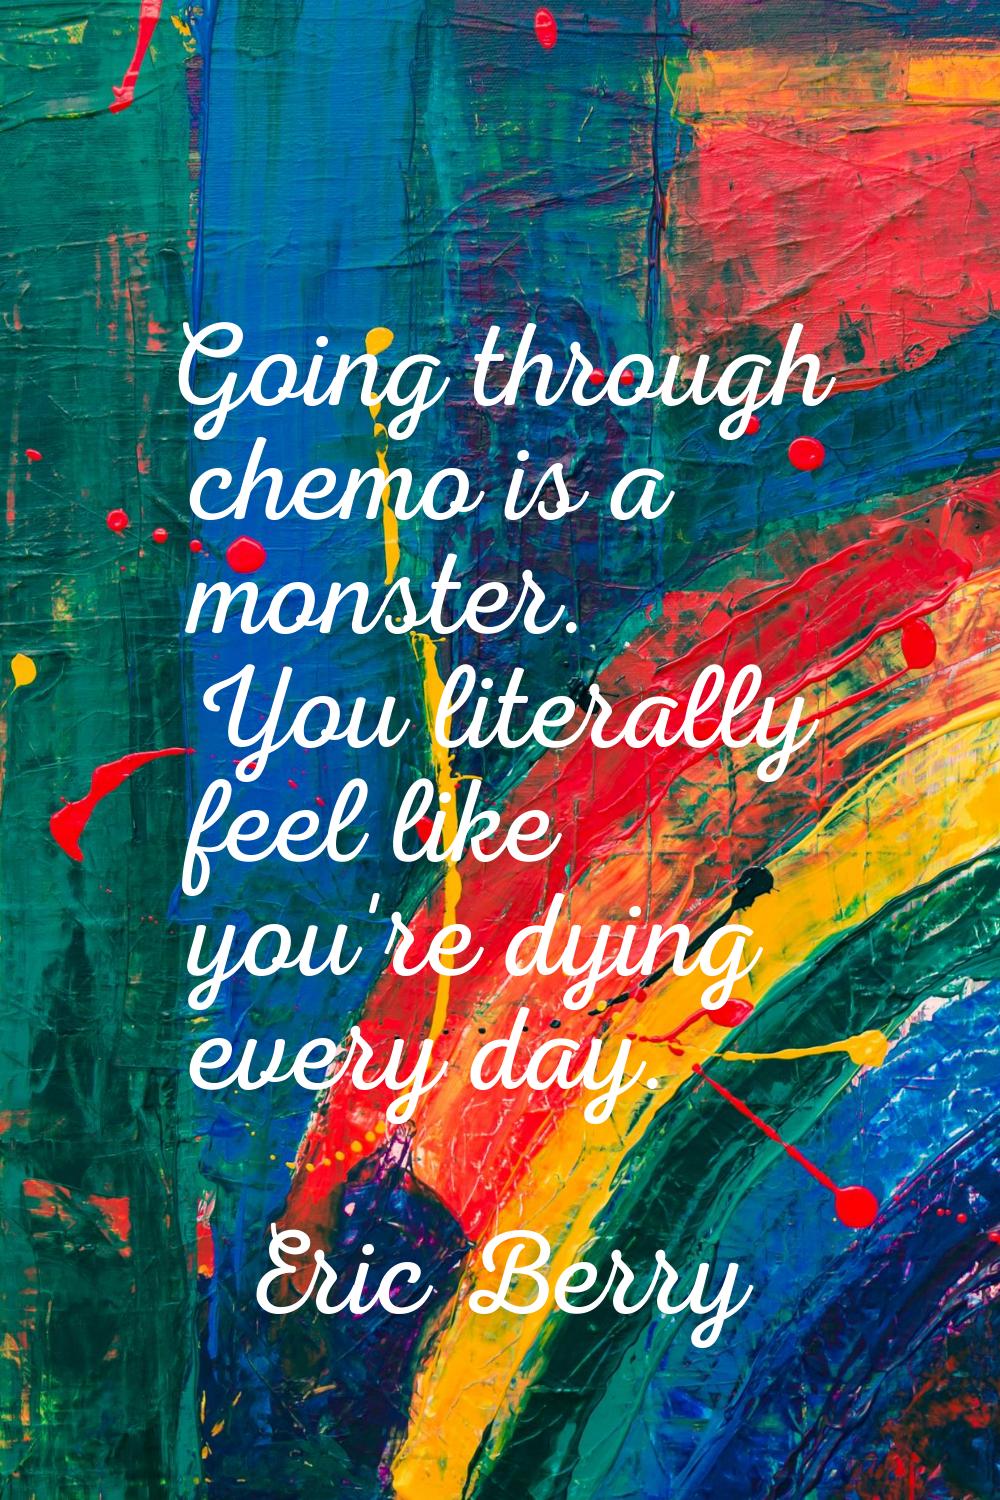 Going through chemo is a monster. You literally feel like you're dying every day.